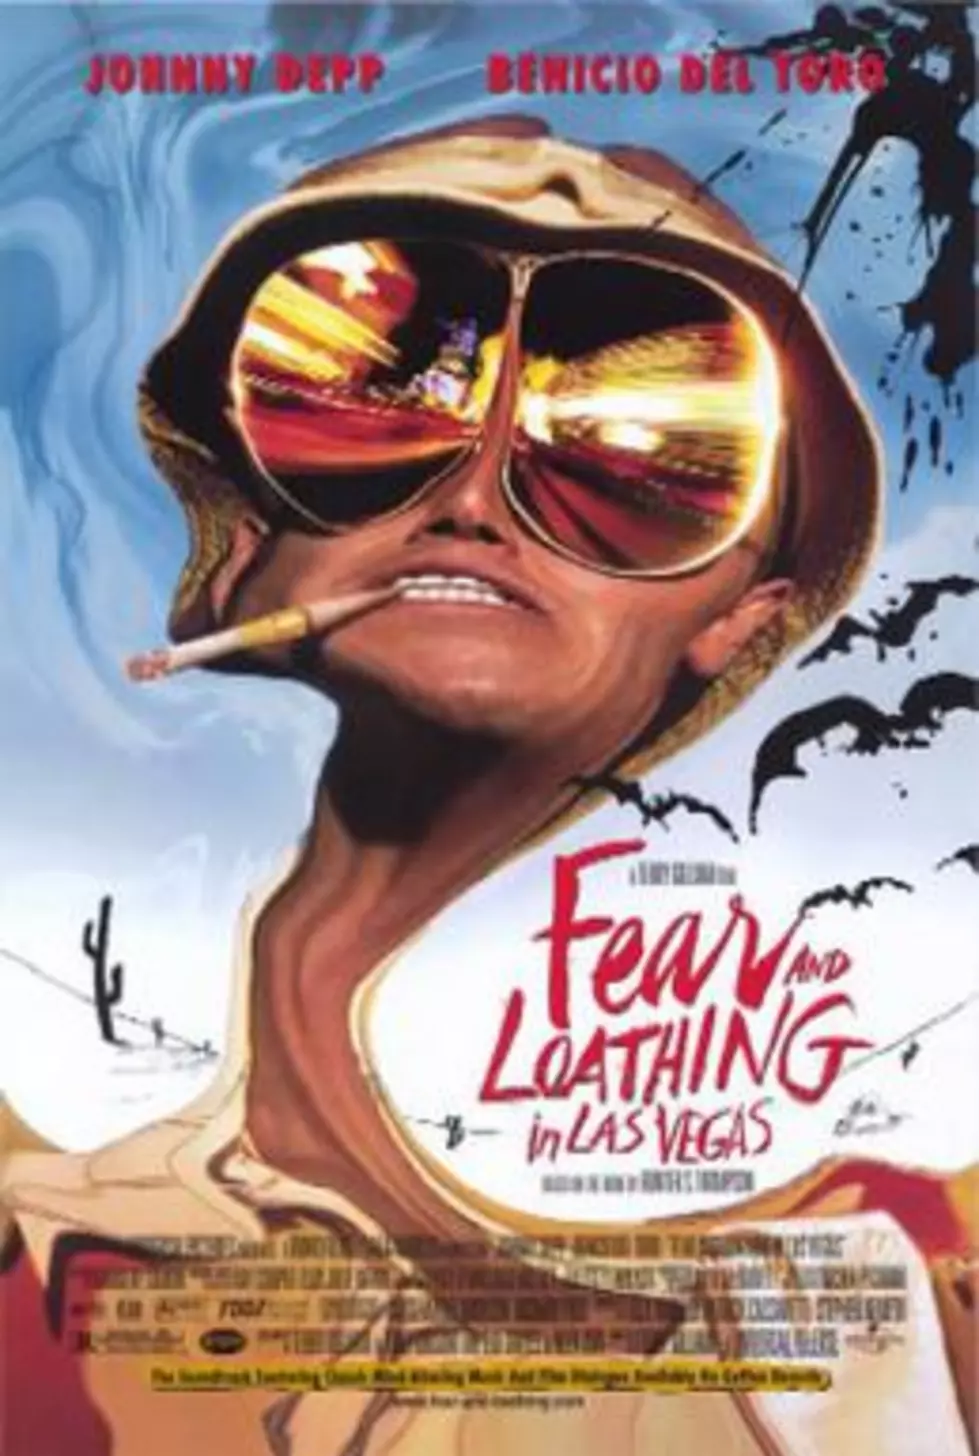 'Fear and Loathing in Las Vegas' Showing at Proctors This Weekend